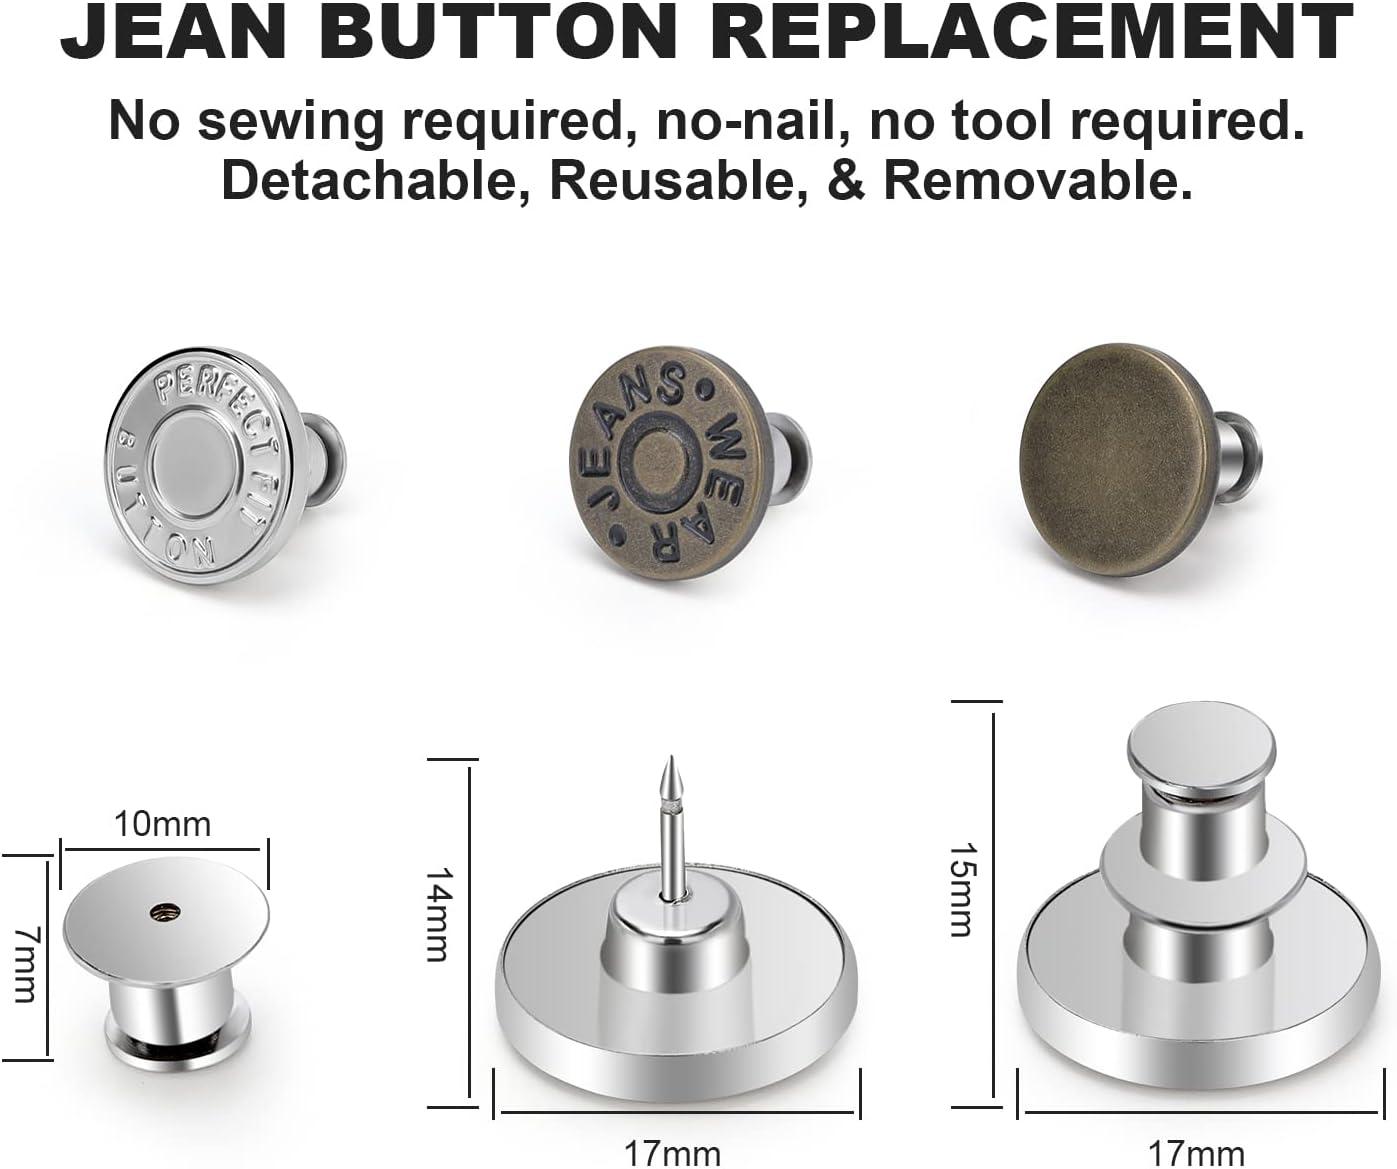 17mm Open Top Replacement Jeans Buttons Pins with Fixing Hand Tool